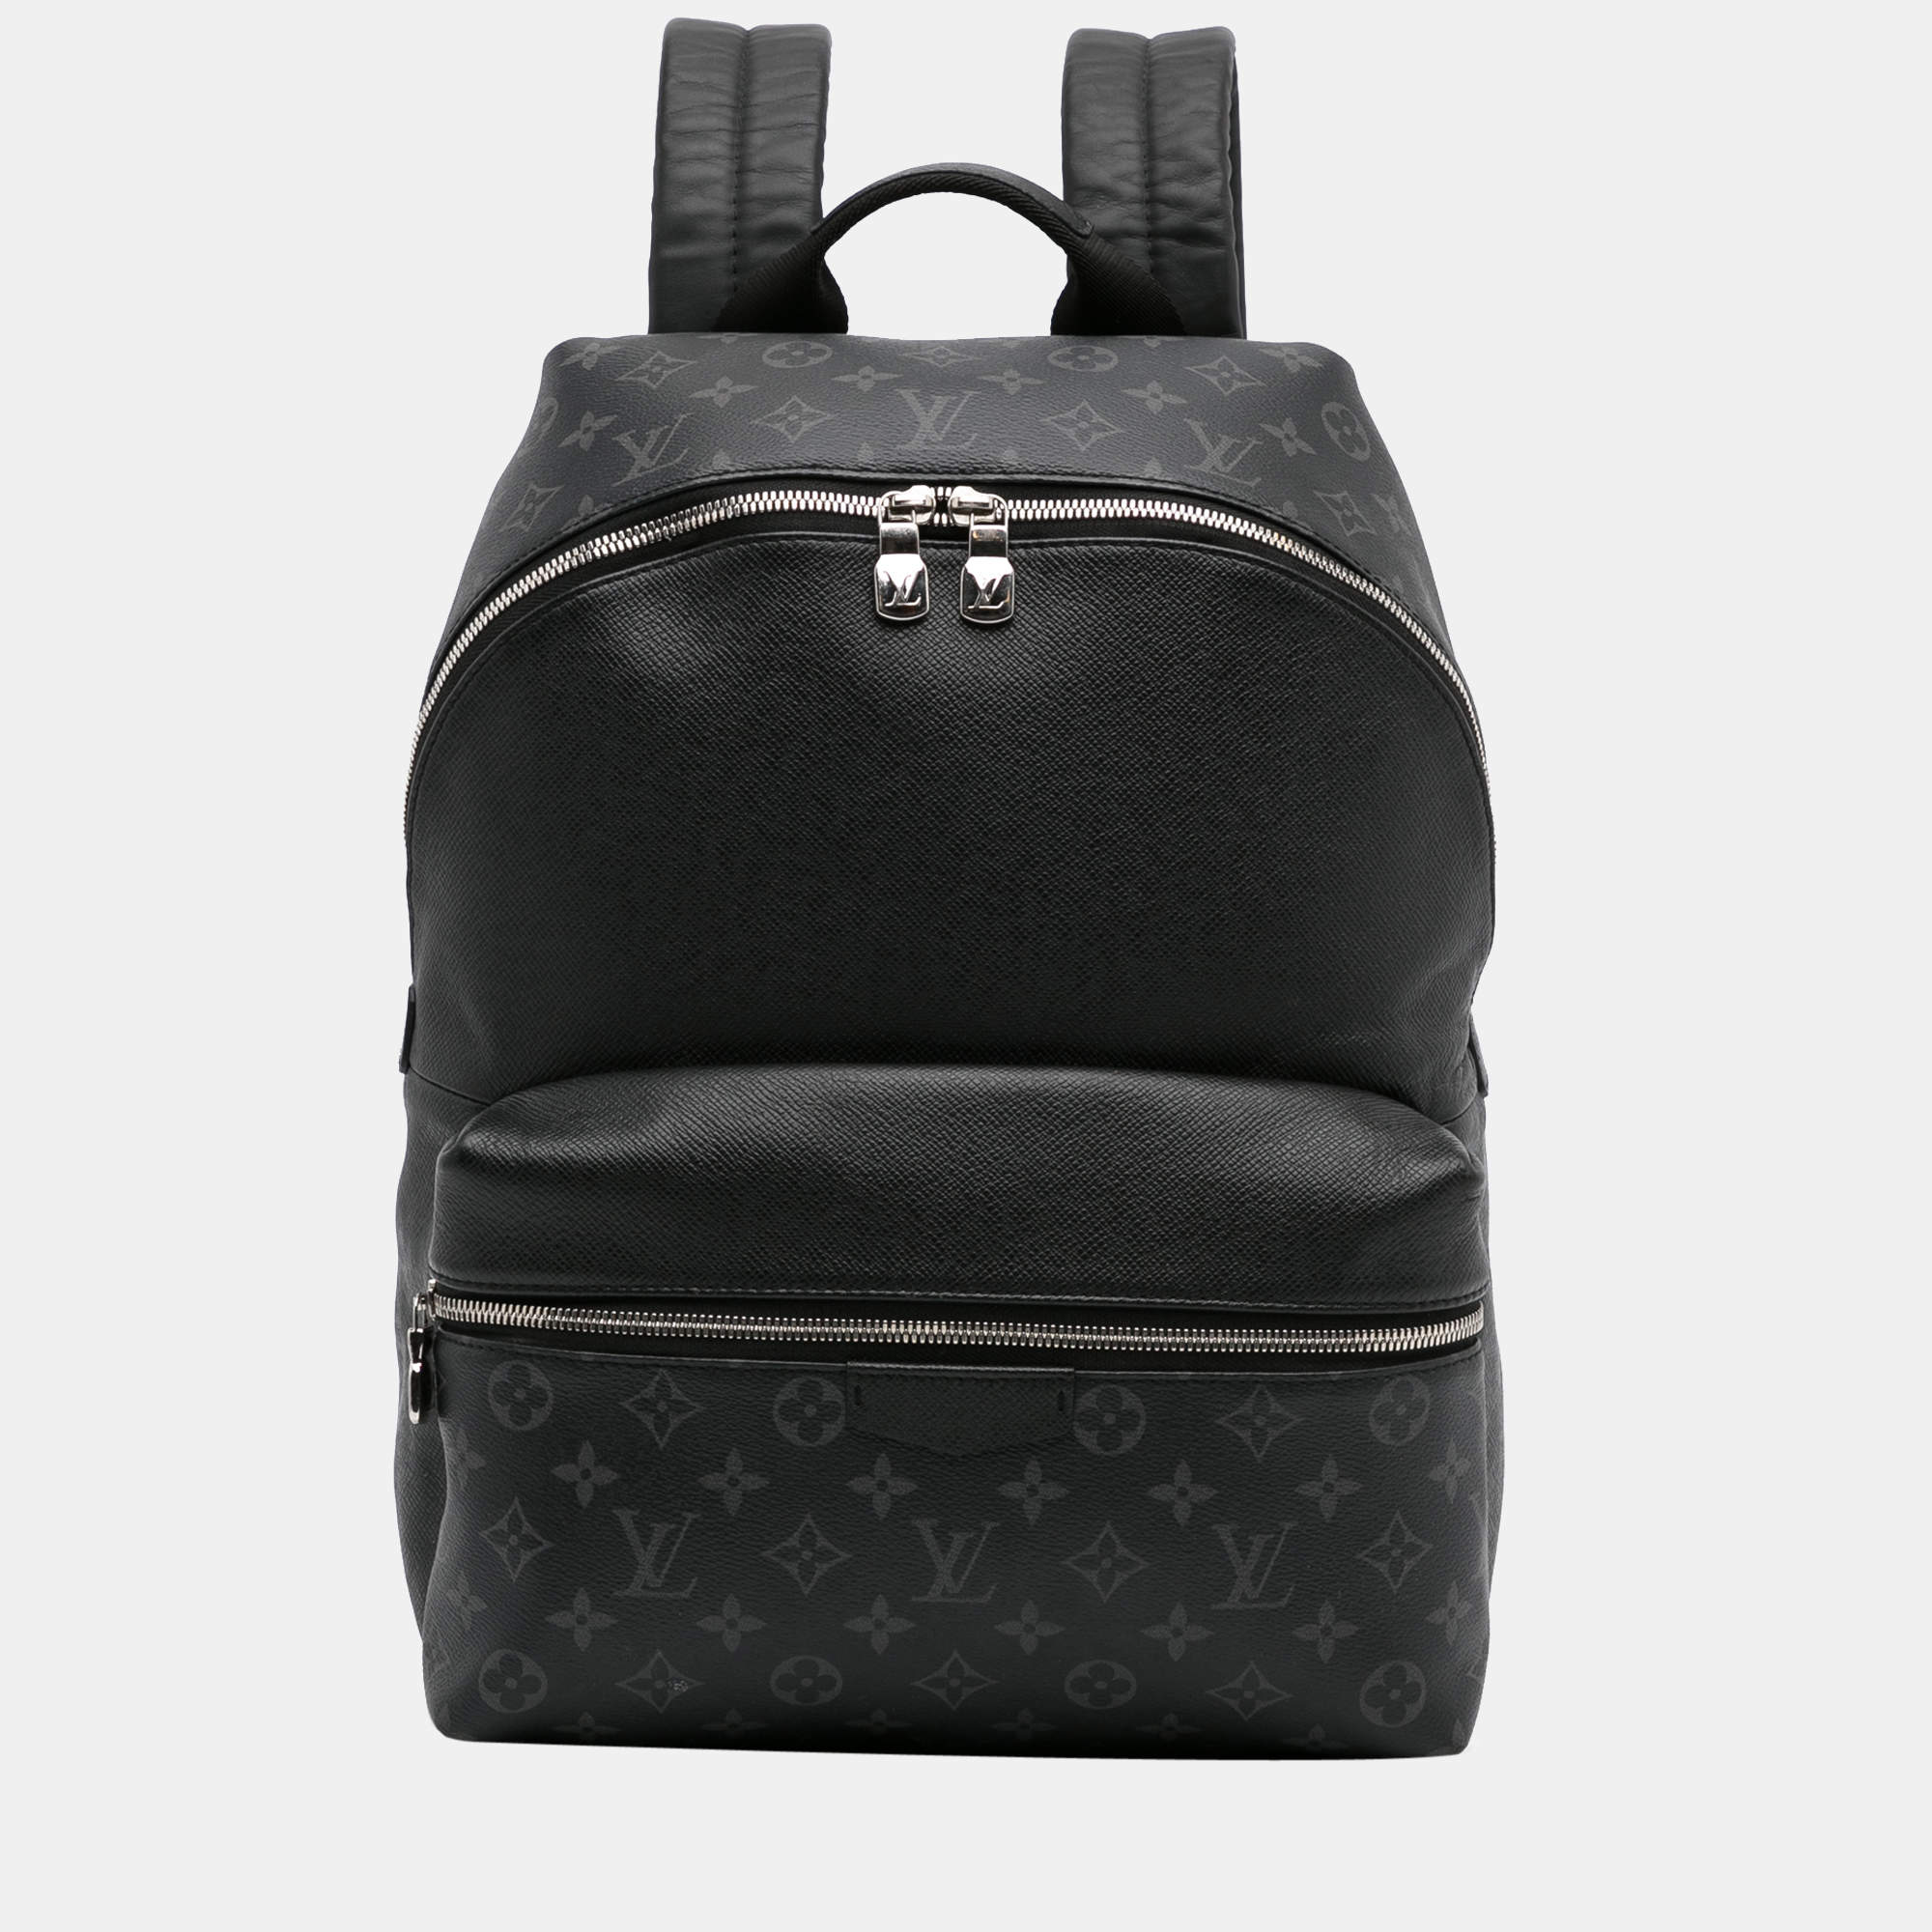 LOUIS VUITTON Discovery PM Taiga Monogram Leather Backpack White